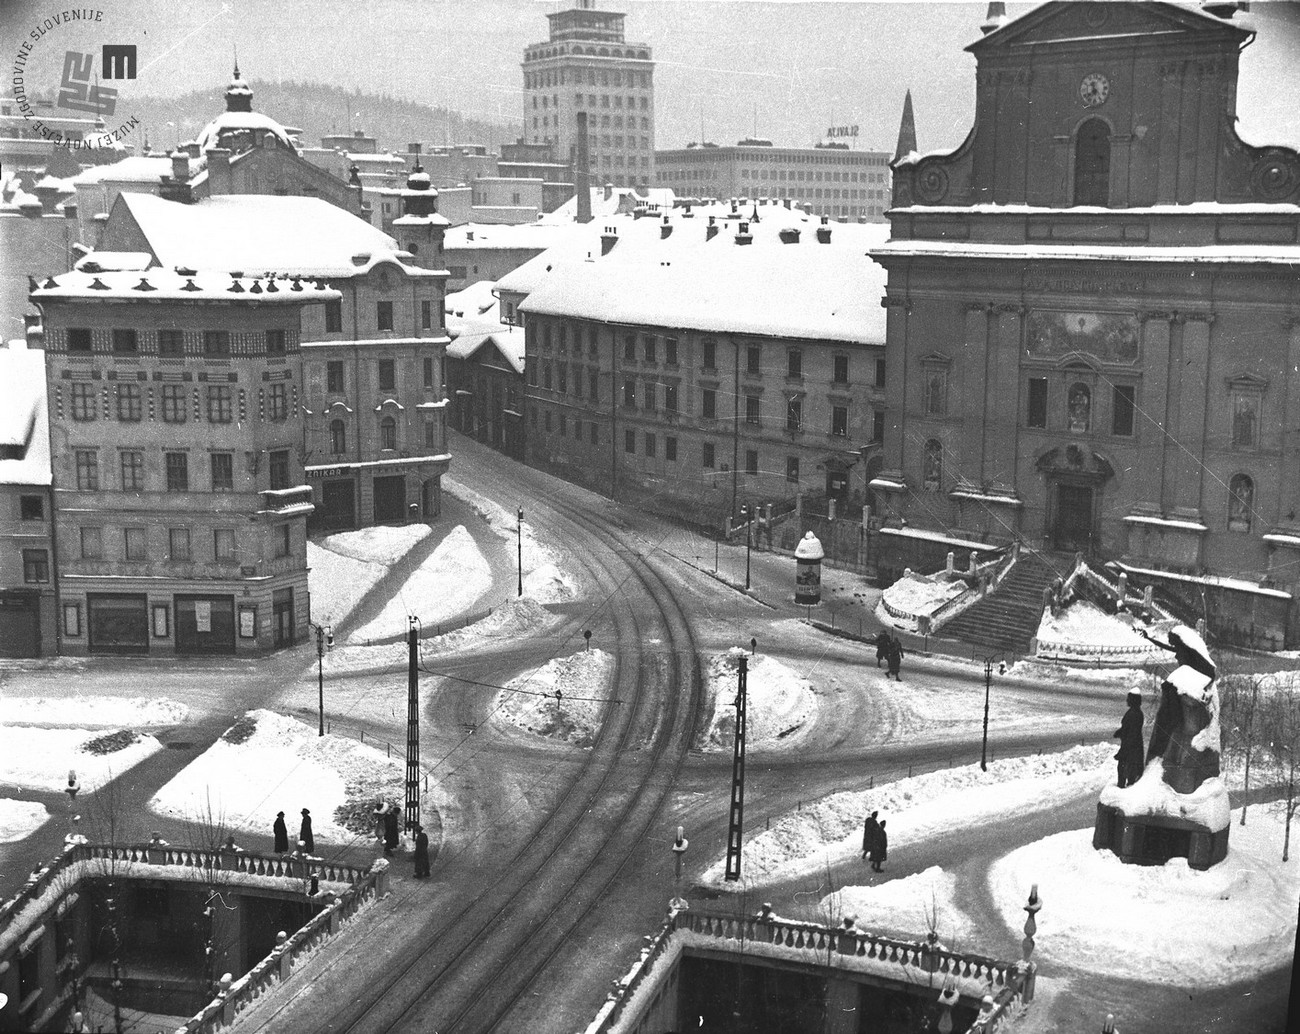 Prešeren Square after the introduction of the driving ban, ban on public drinking establishment and public events. Author: Jakob Prešern. MNZS.